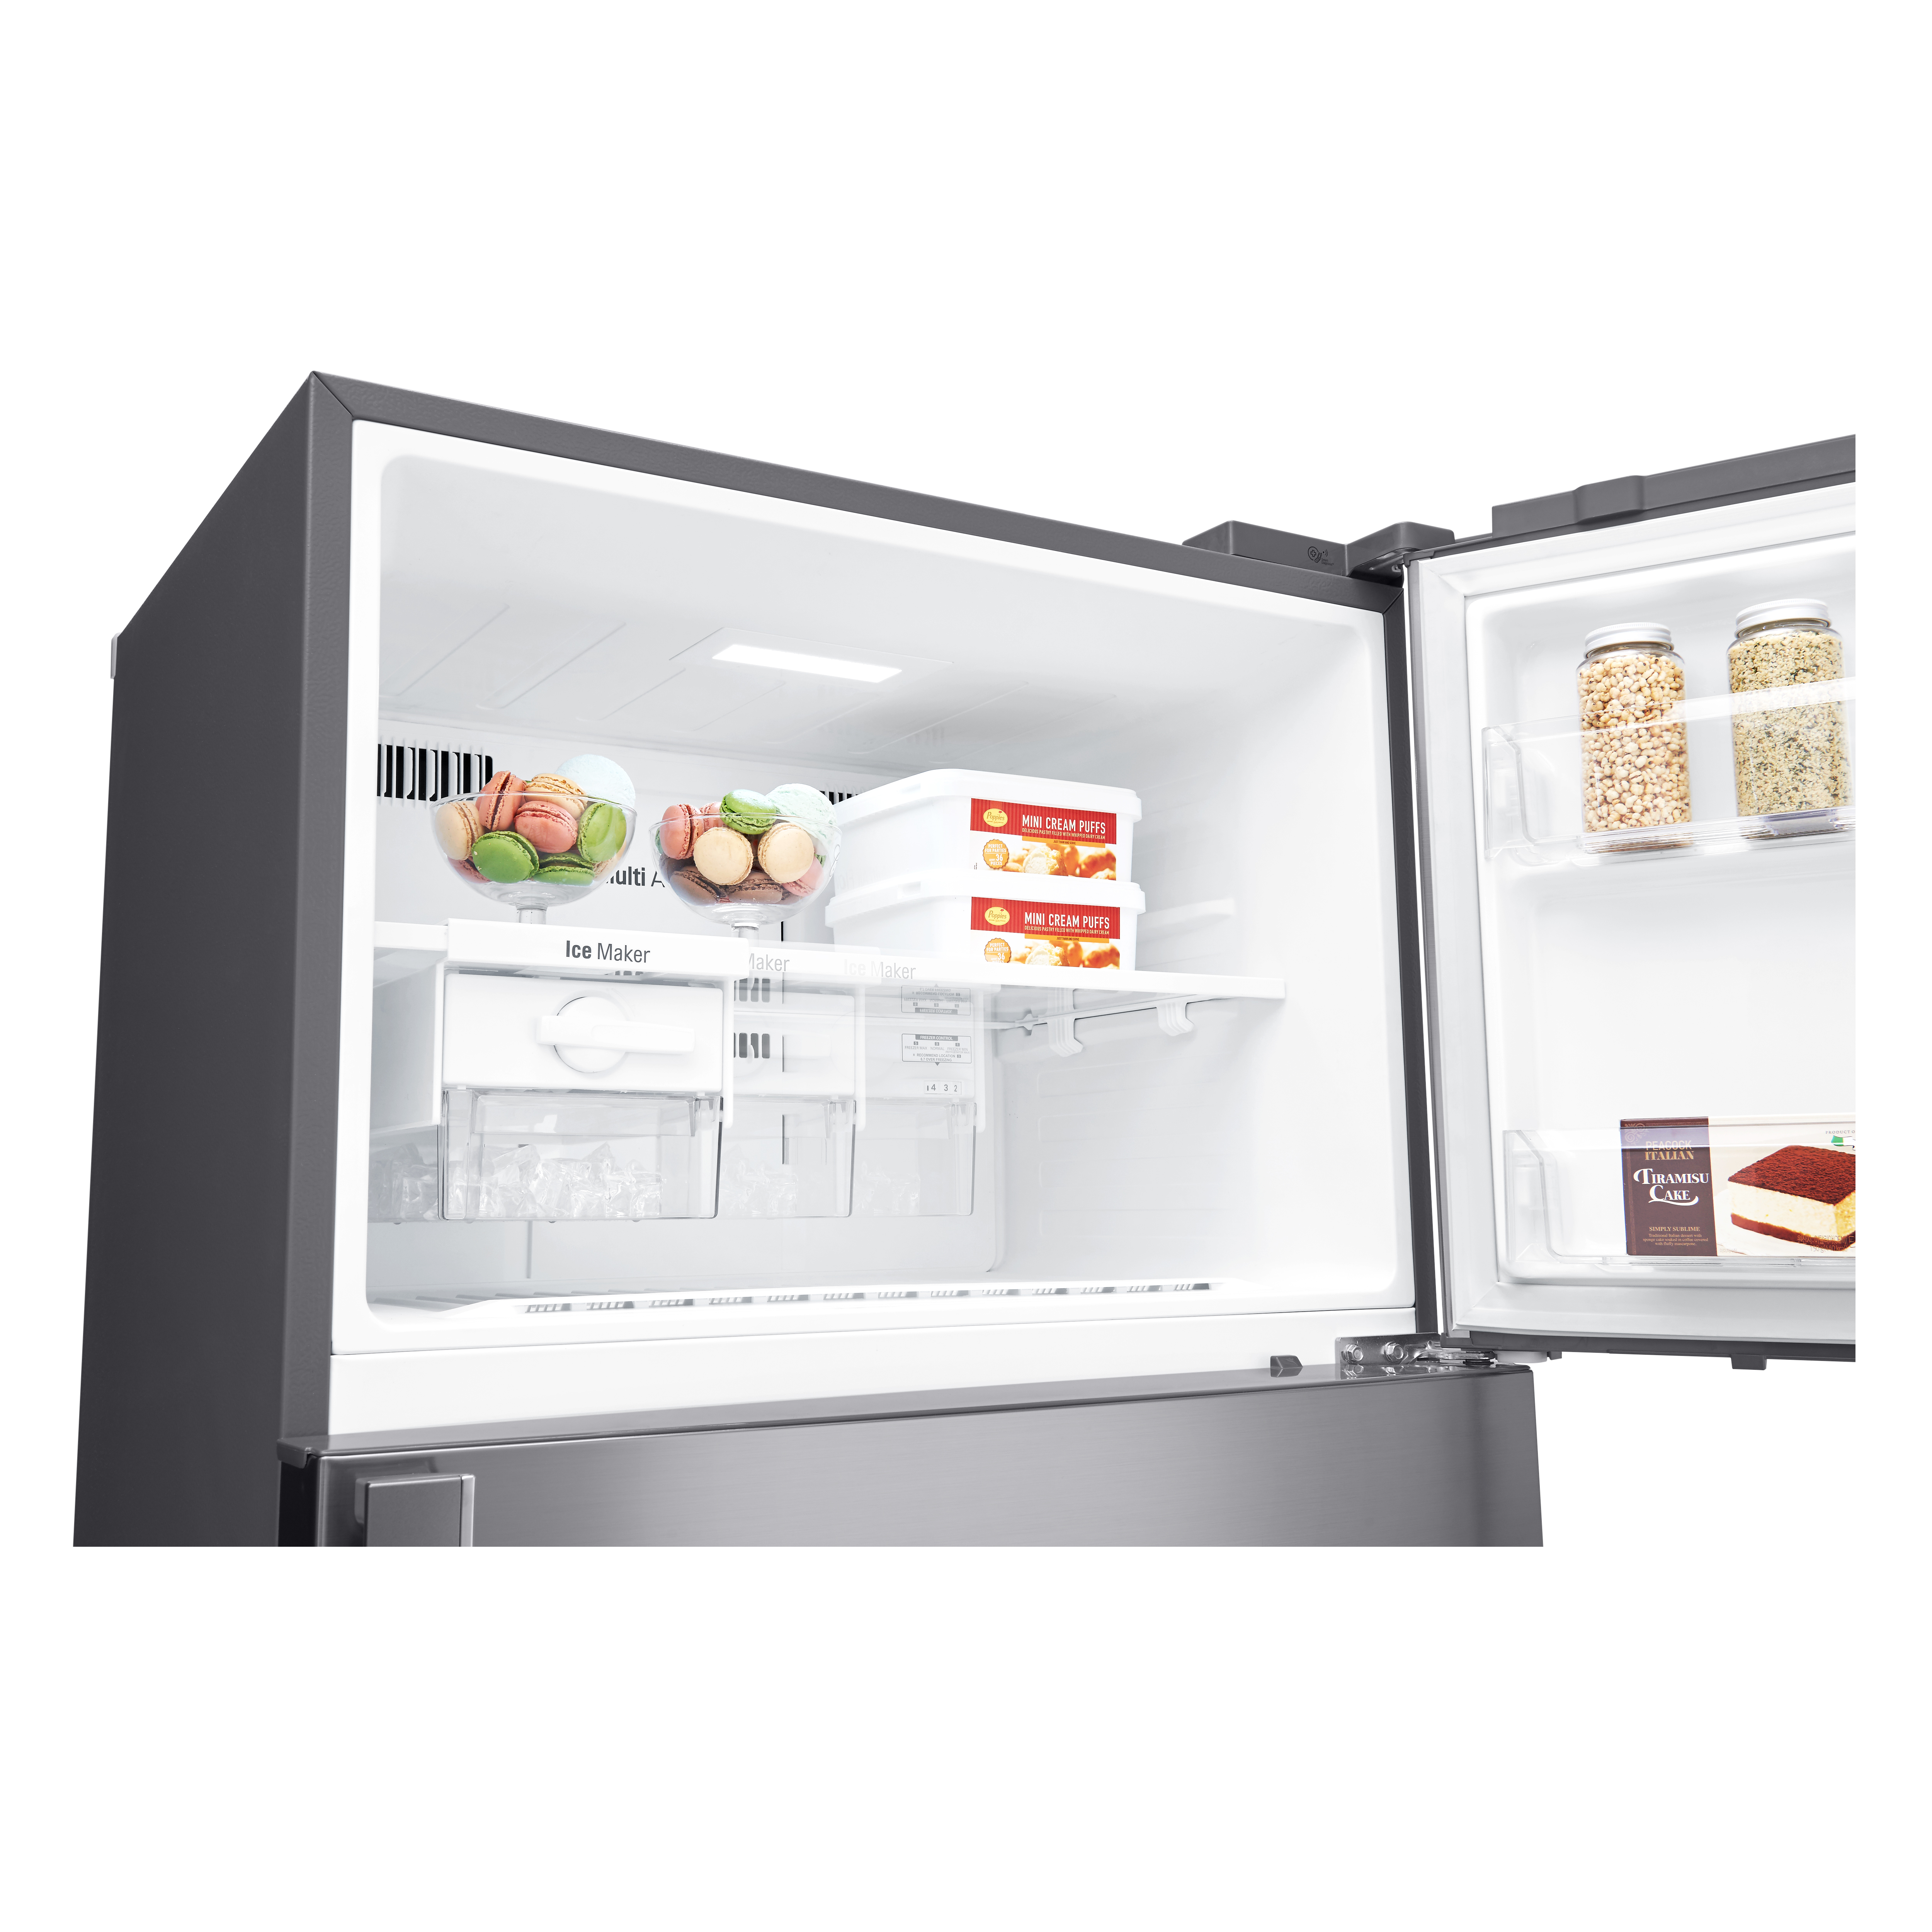 LG Top Freezer Refrigerator with Inverter Motor, No Frost, 506 Liters, Silver - GN-H722HLHL